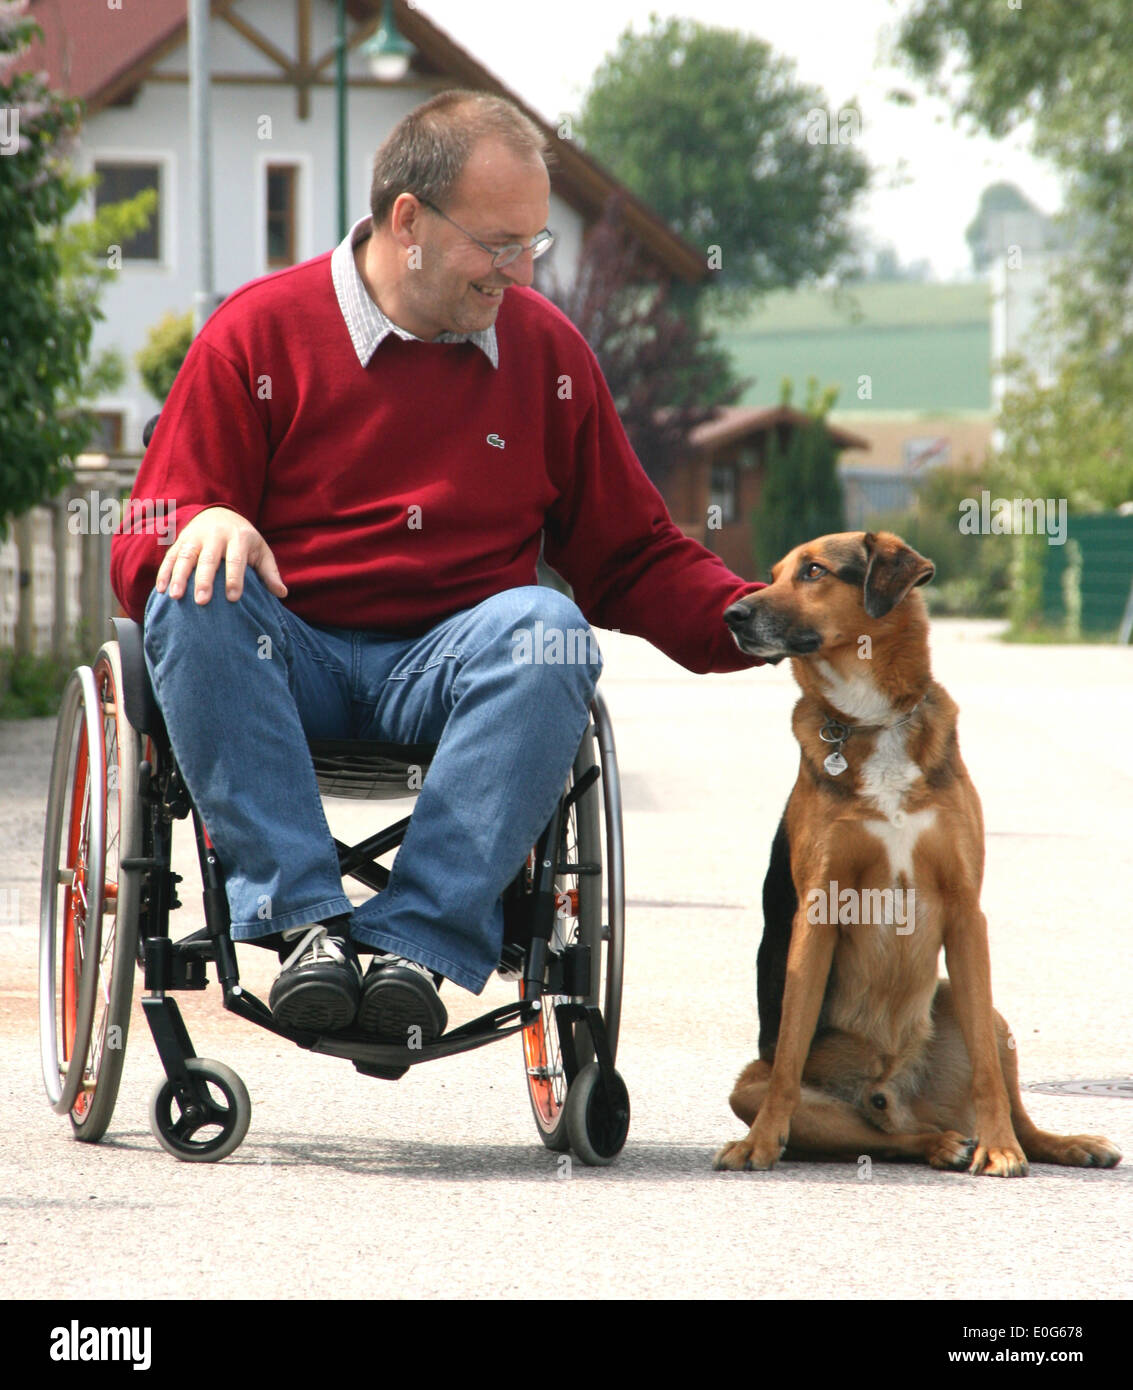 Man in the wheel chair with dog - one in a wheelchair with dog [], barrier, barriers, Hindering, suitable for the handicapped, s Stock Photo